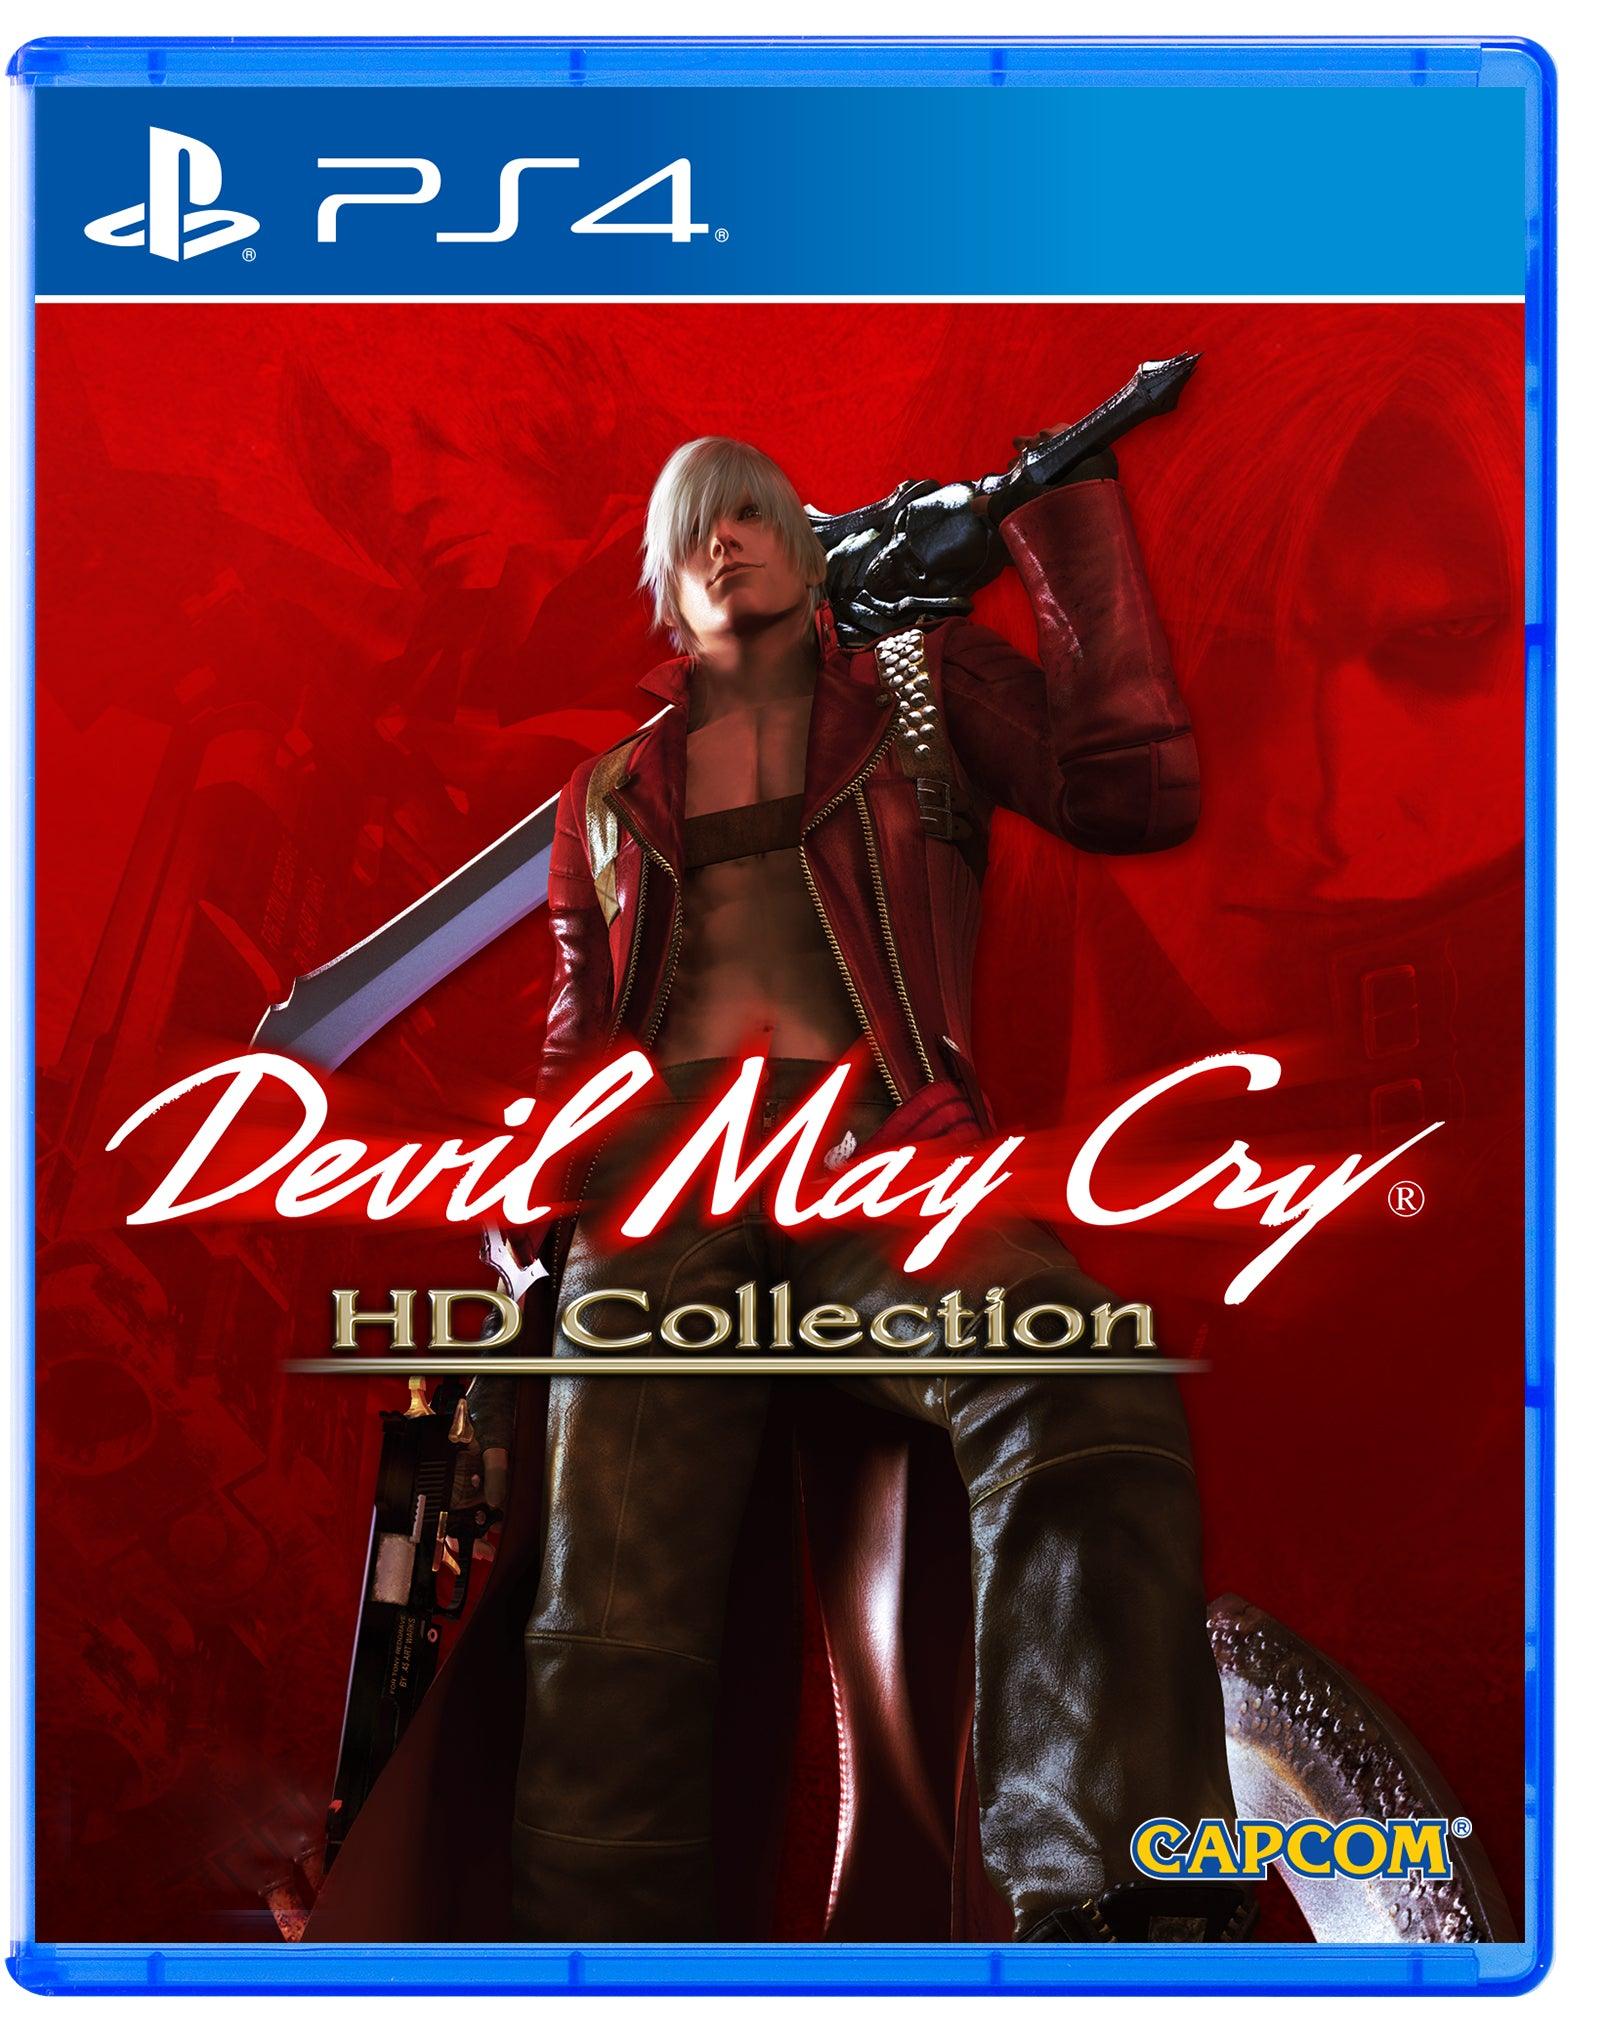 DataBlitz - FACE YOUR DEMONS! DmC Devil May Cry: Definitive Edition for PS4  and Xbox One will be available today at Datablitz! The definitive edition  of this critically-acclaimed action game arrives with